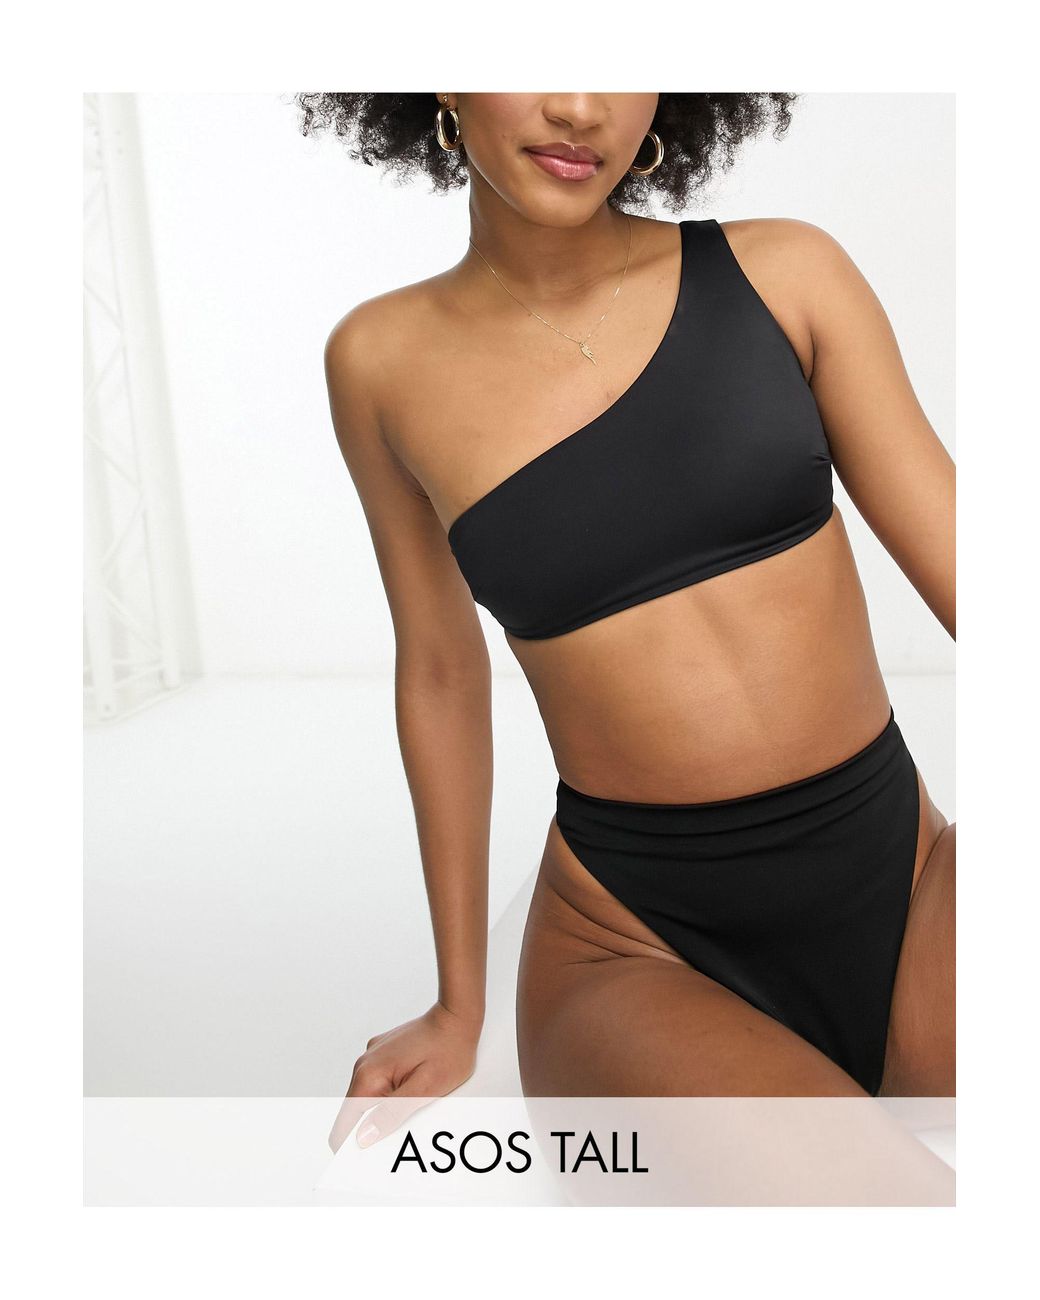 TRYING ON BIKINIS FROM ASOS IS IT WORTH THE MONEY!? 